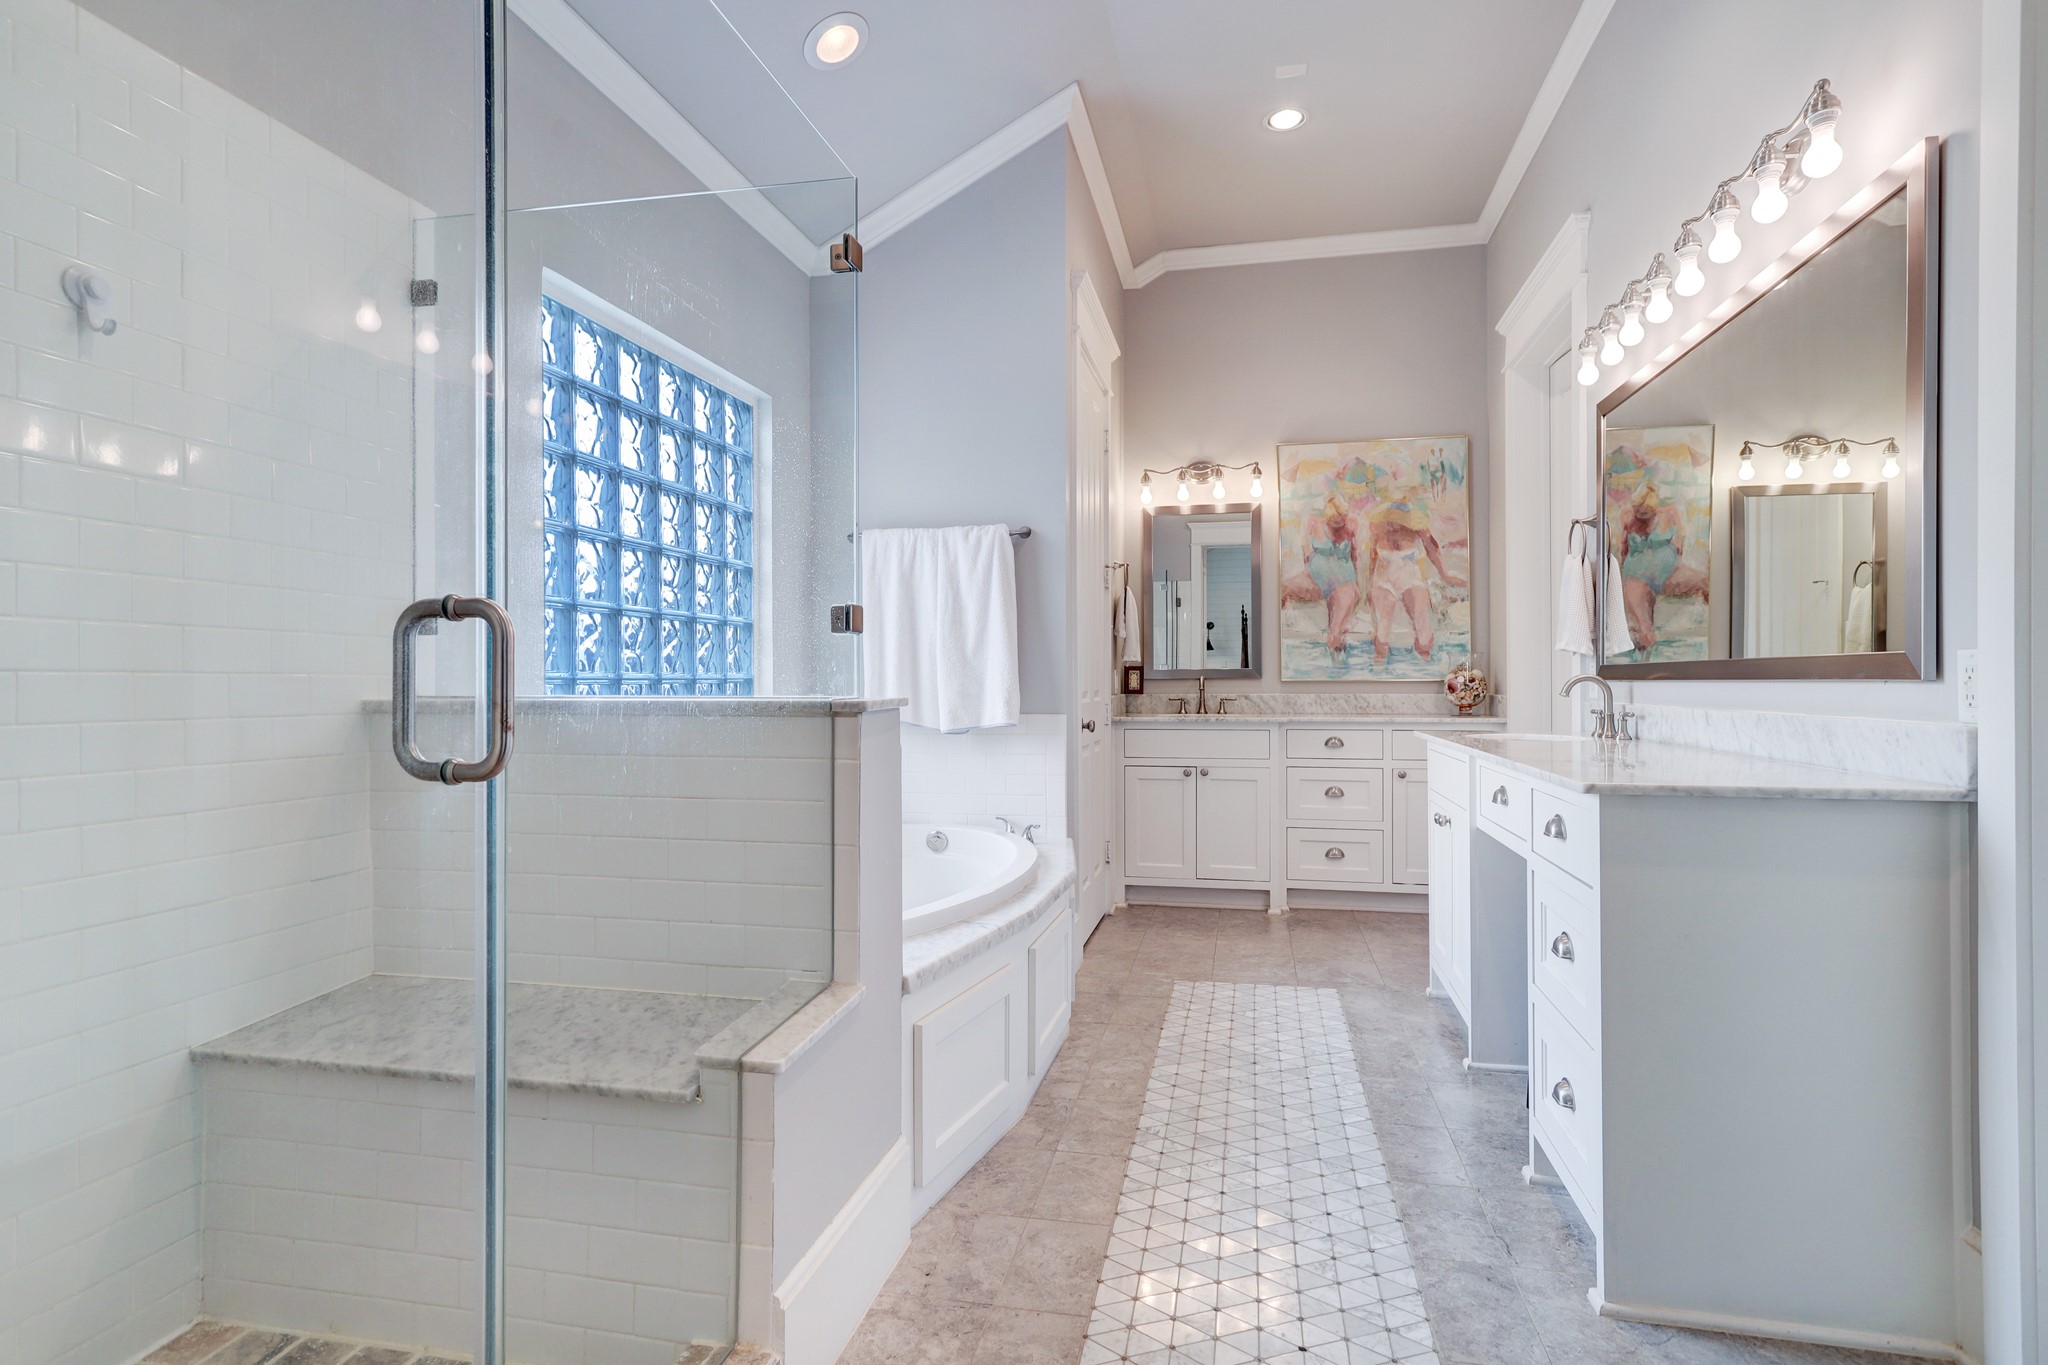 The primary bathroom features dual vanities with marble counter tops, a walk-in shower with built-in bench, a comfortable bathtub, separate water closet, and two entrances to the primary closet.